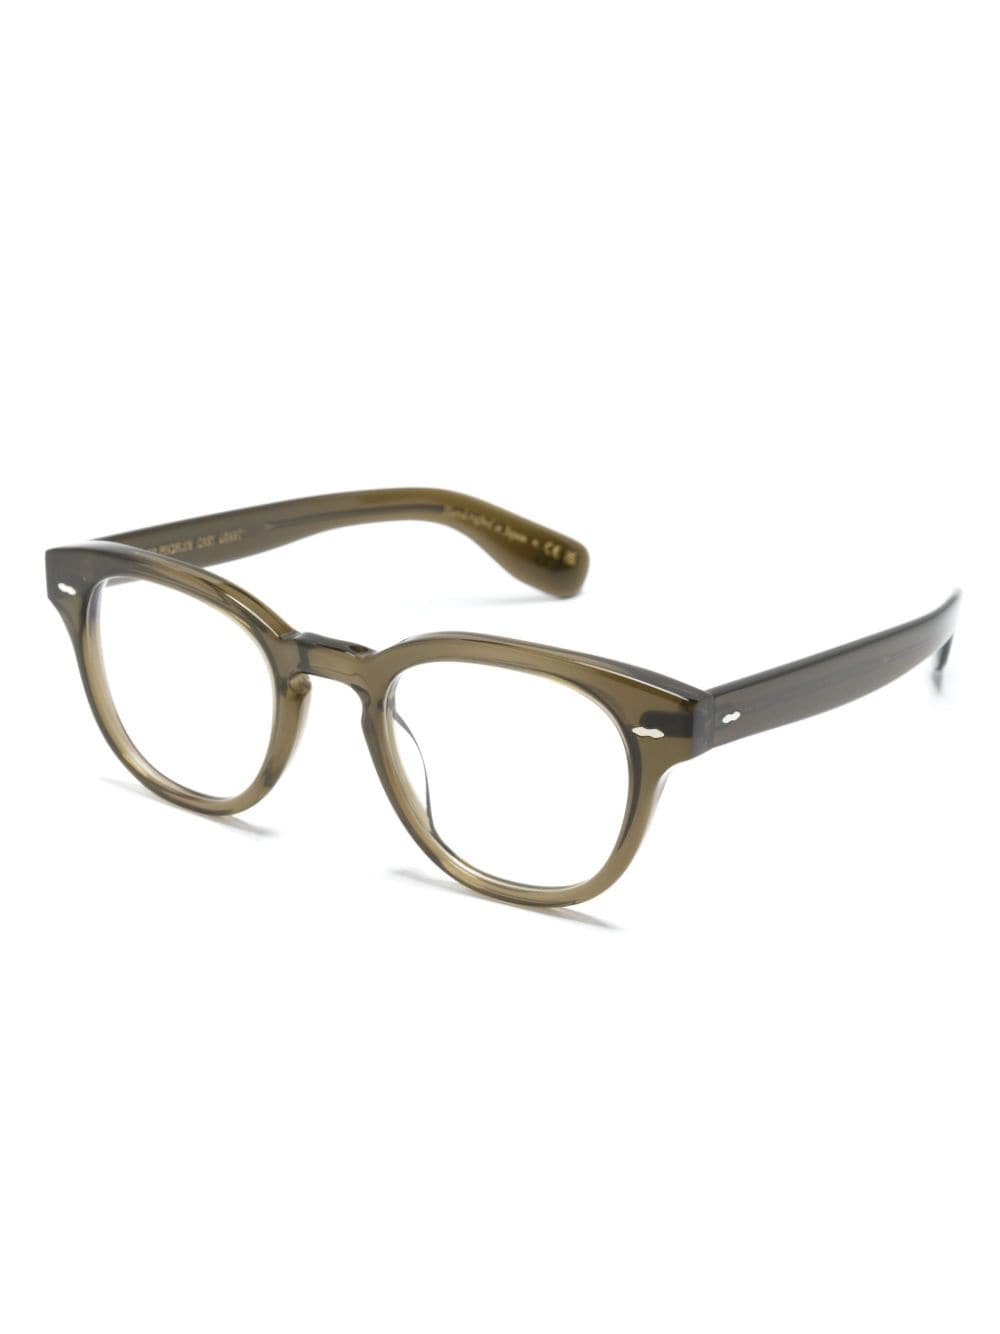 Image 2 of Oliver Peoples Cary Grant round-frame glasses